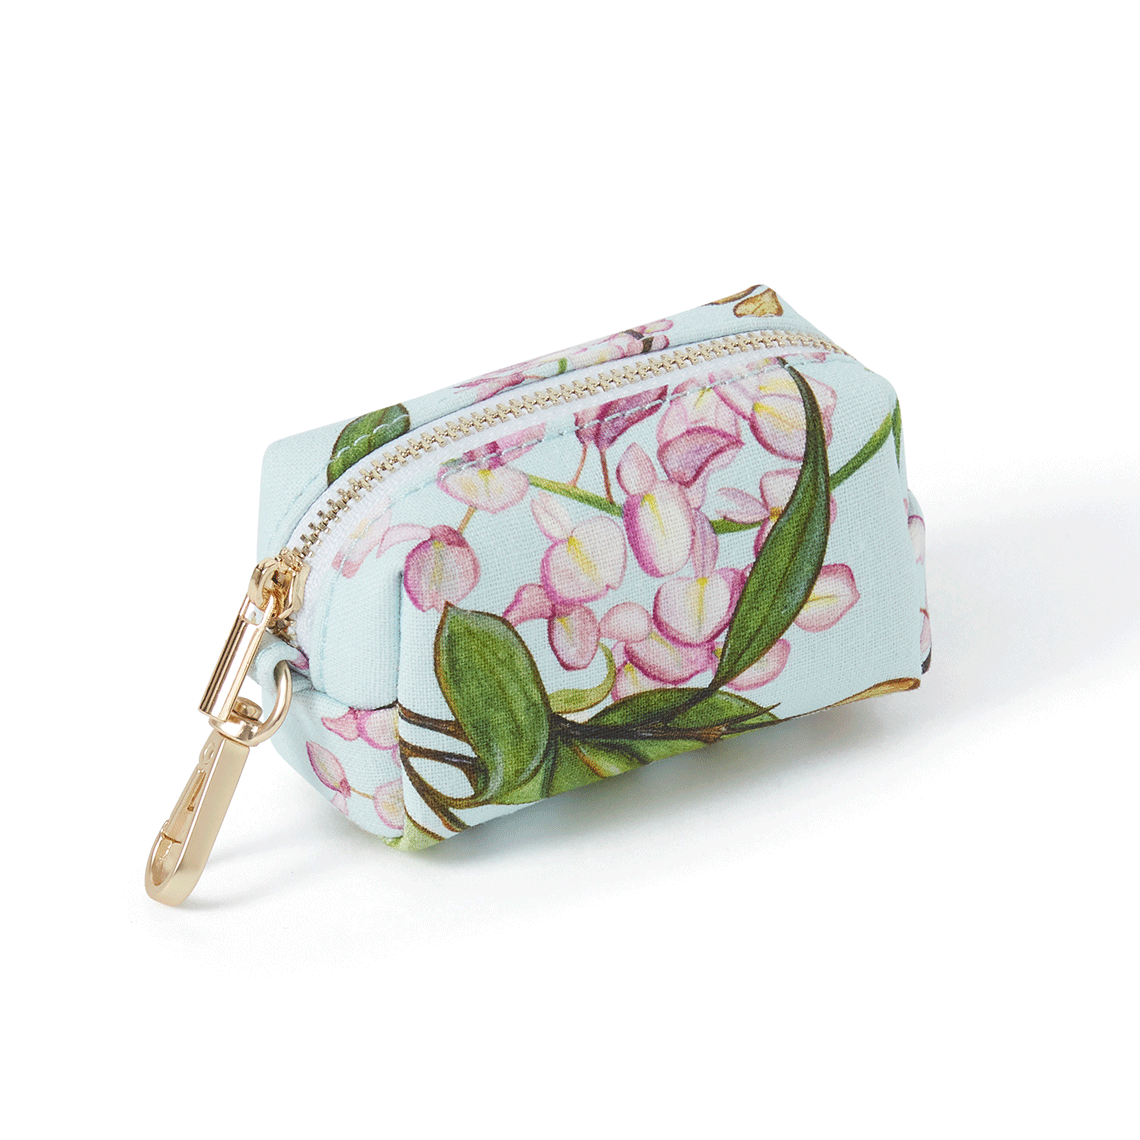 DOG WASTE BAG - WATERCOLOUR FLORAL